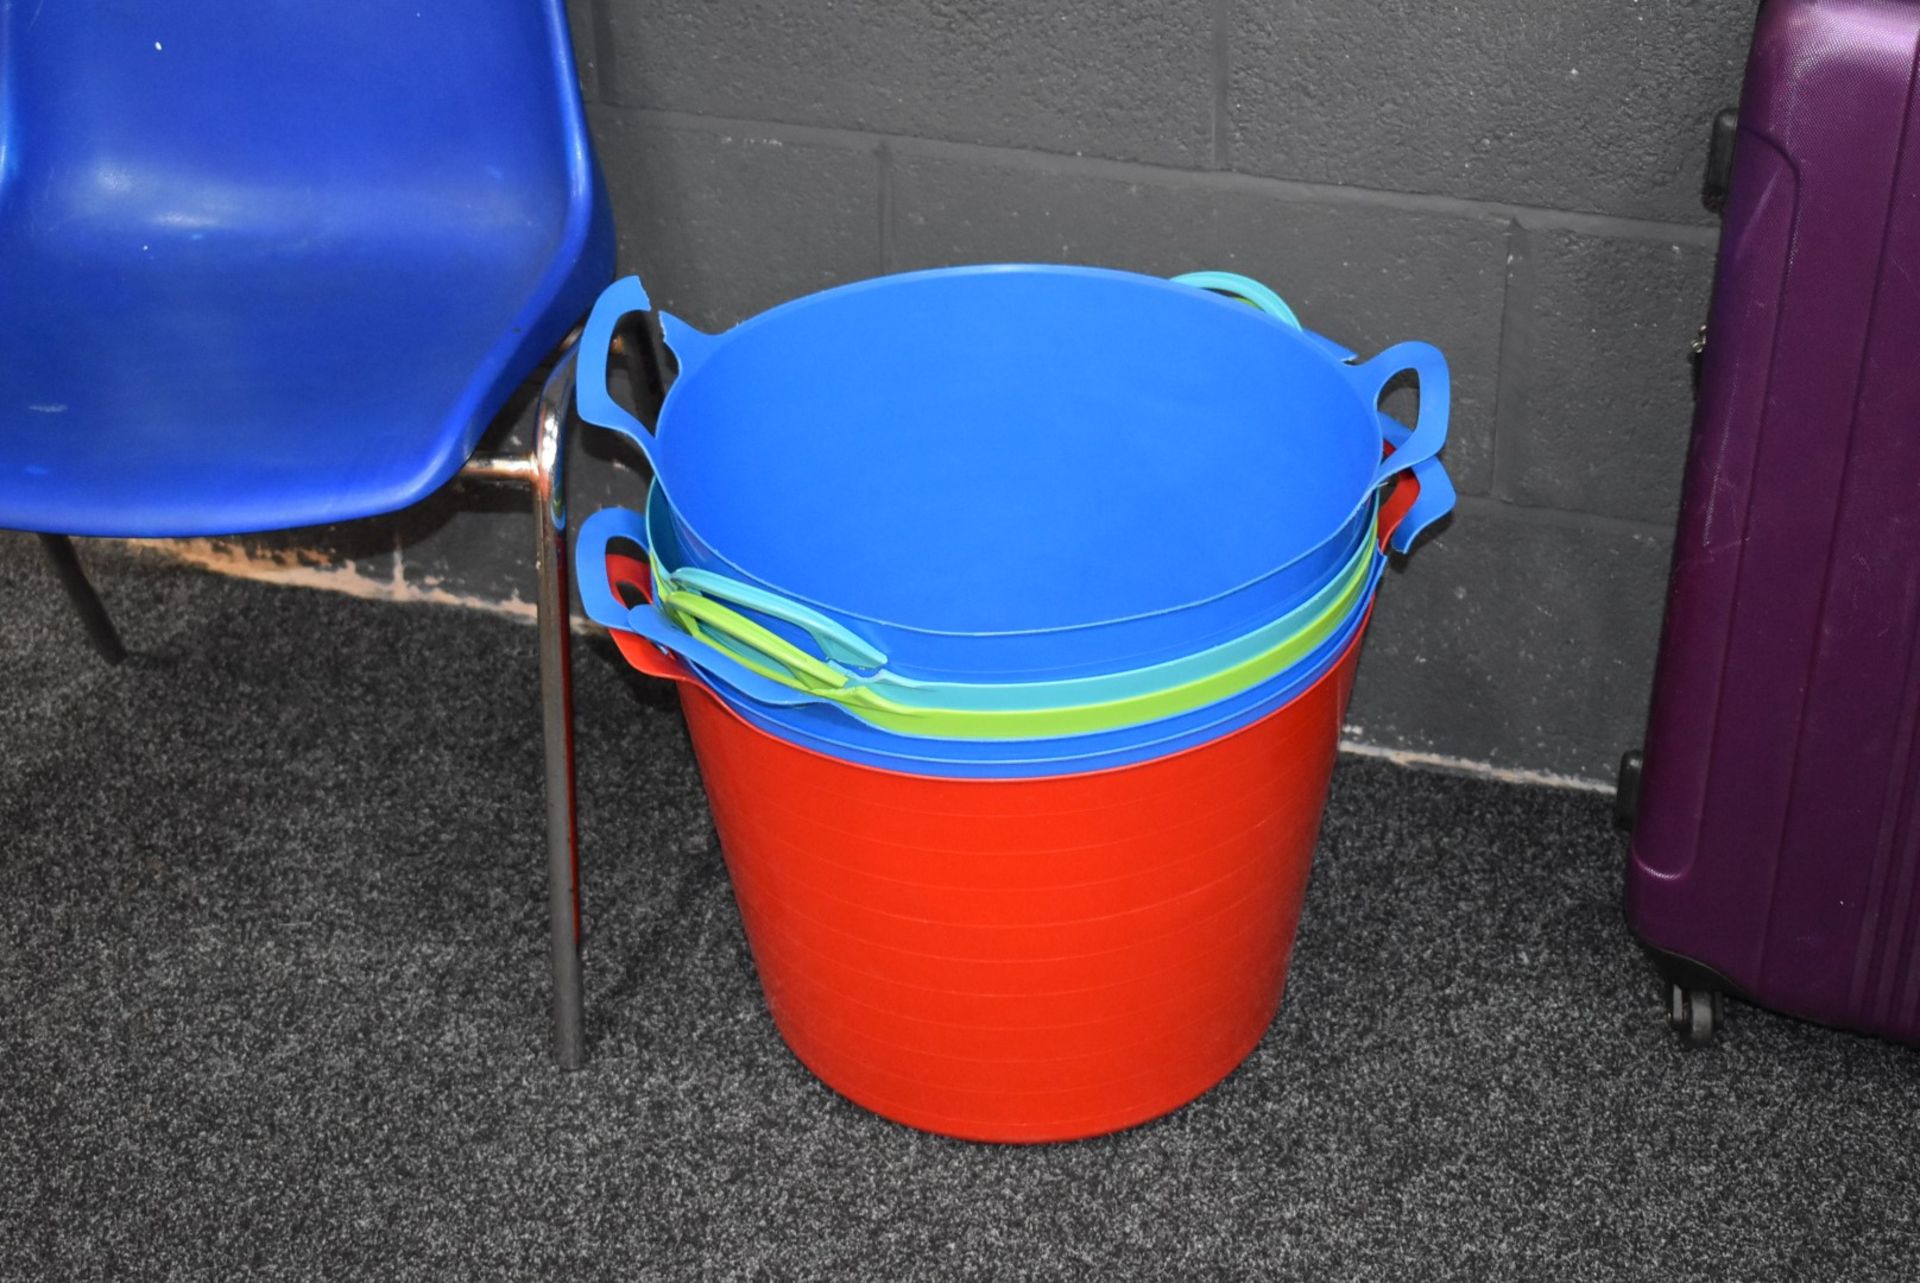 1 x Assorted Collection to Includes 2 x Blue Chairs, Travel Case, Buckets and 2 x Waste Bins - Image 3 of 5